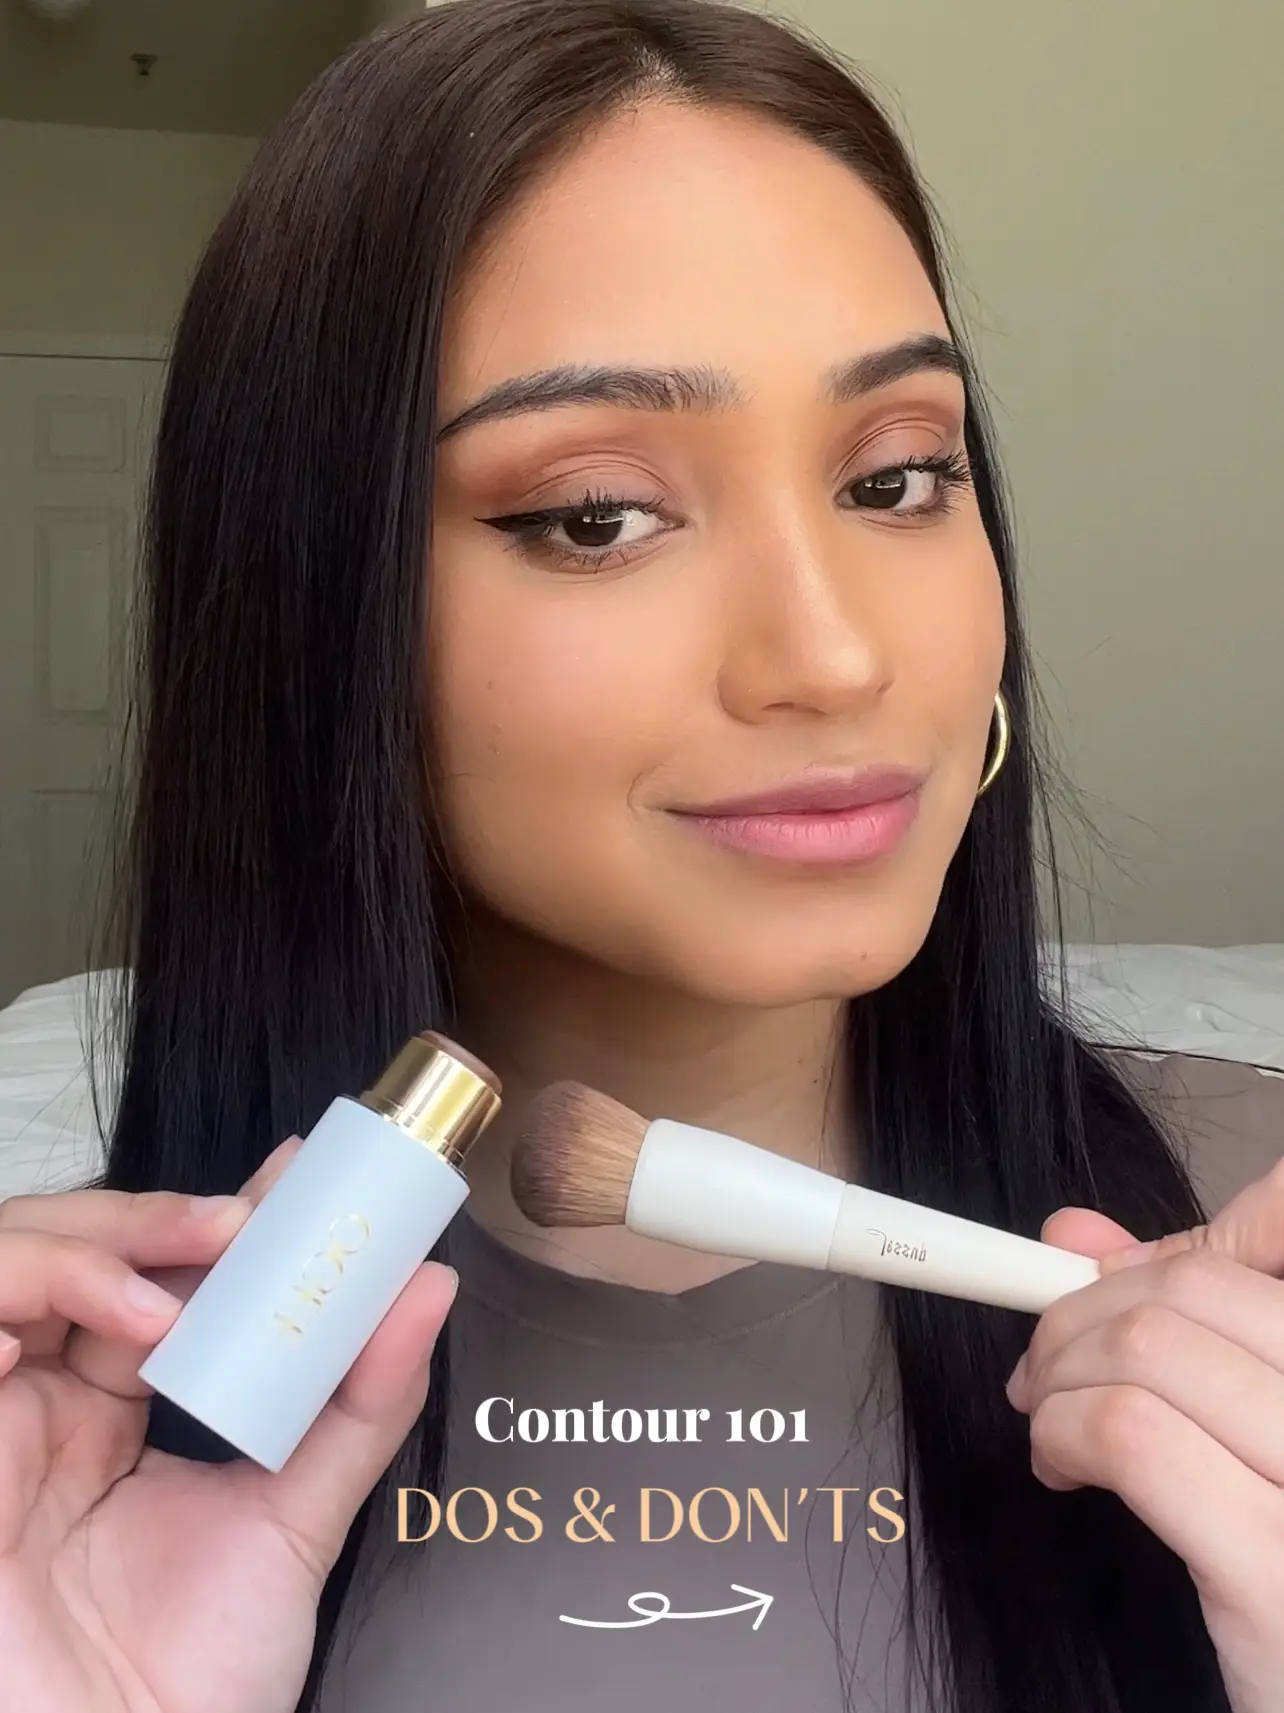 Contour Do's and Don'ts